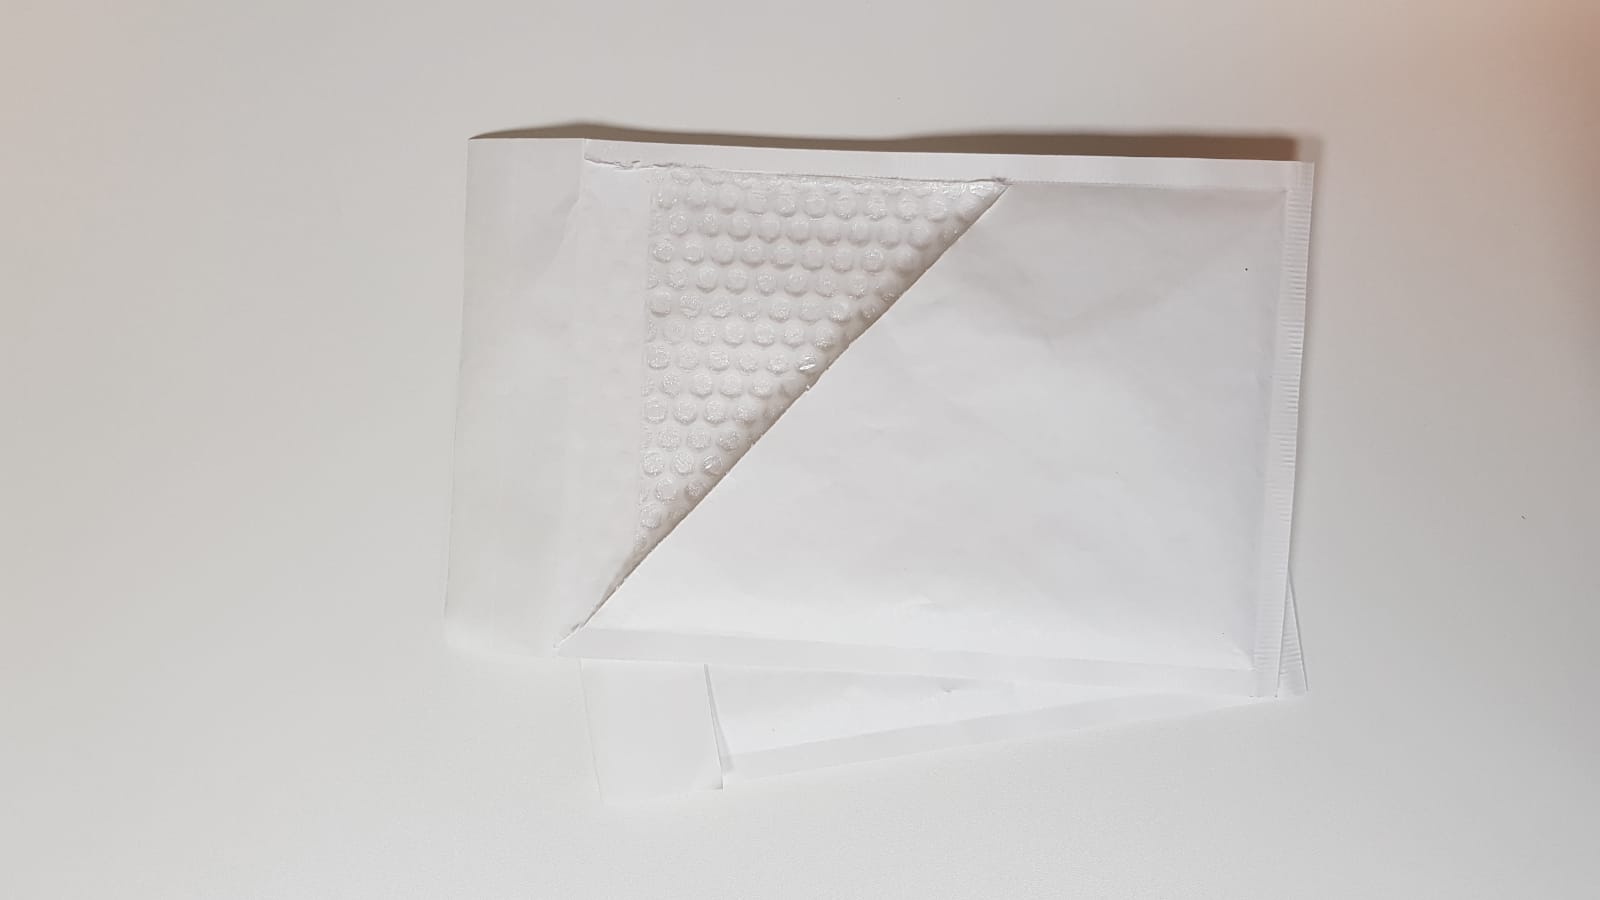 Padded bag 230 X 330 (and various sizes) - Airship White Peel & Seal Padded Bags